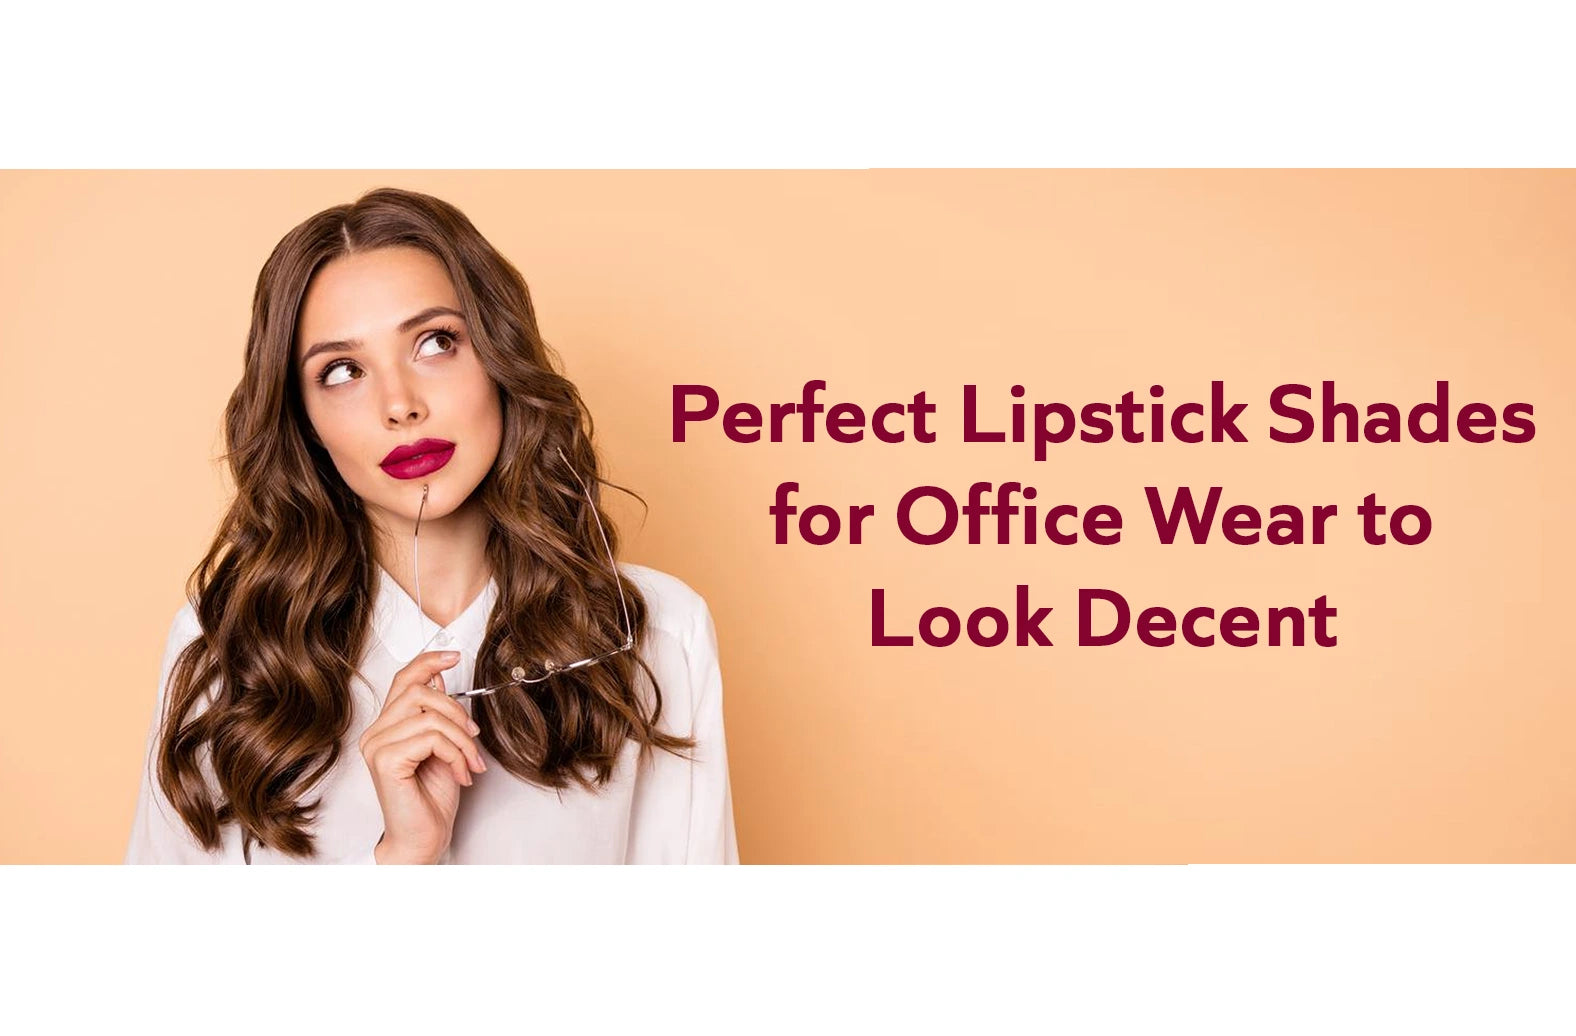 Perfect Lipstick Shades for Office Wear to Look Decent